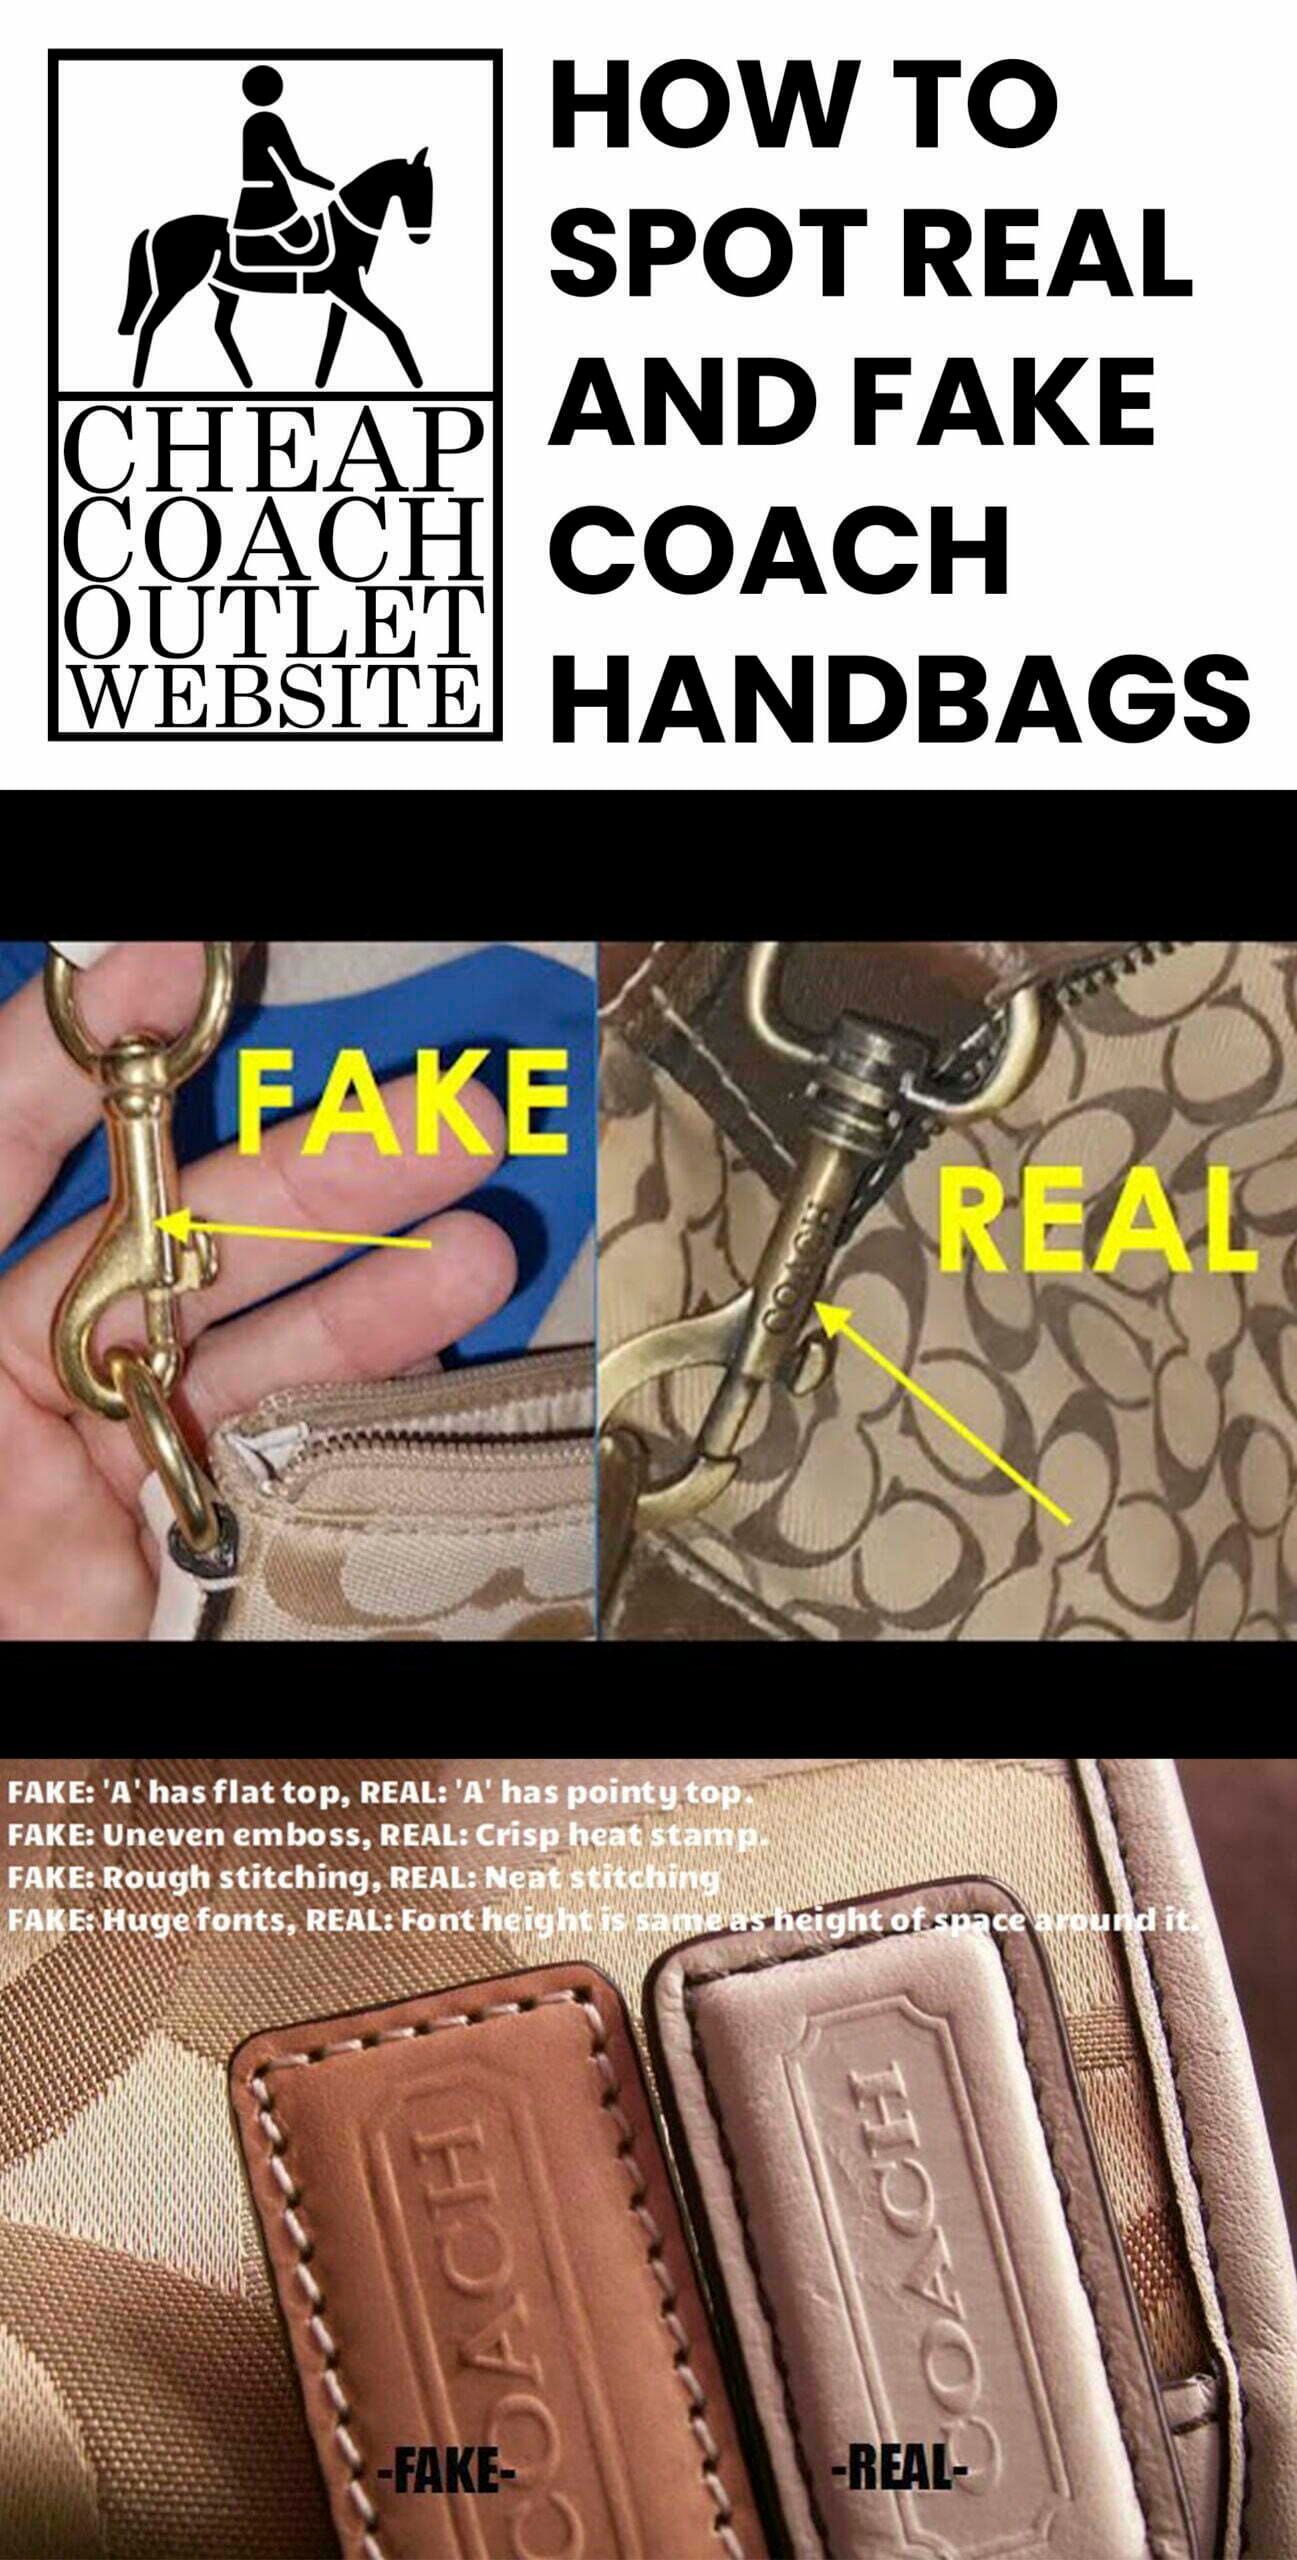 How to Buy a Real Coach Bag for Knockoff or Outlet Prices - The